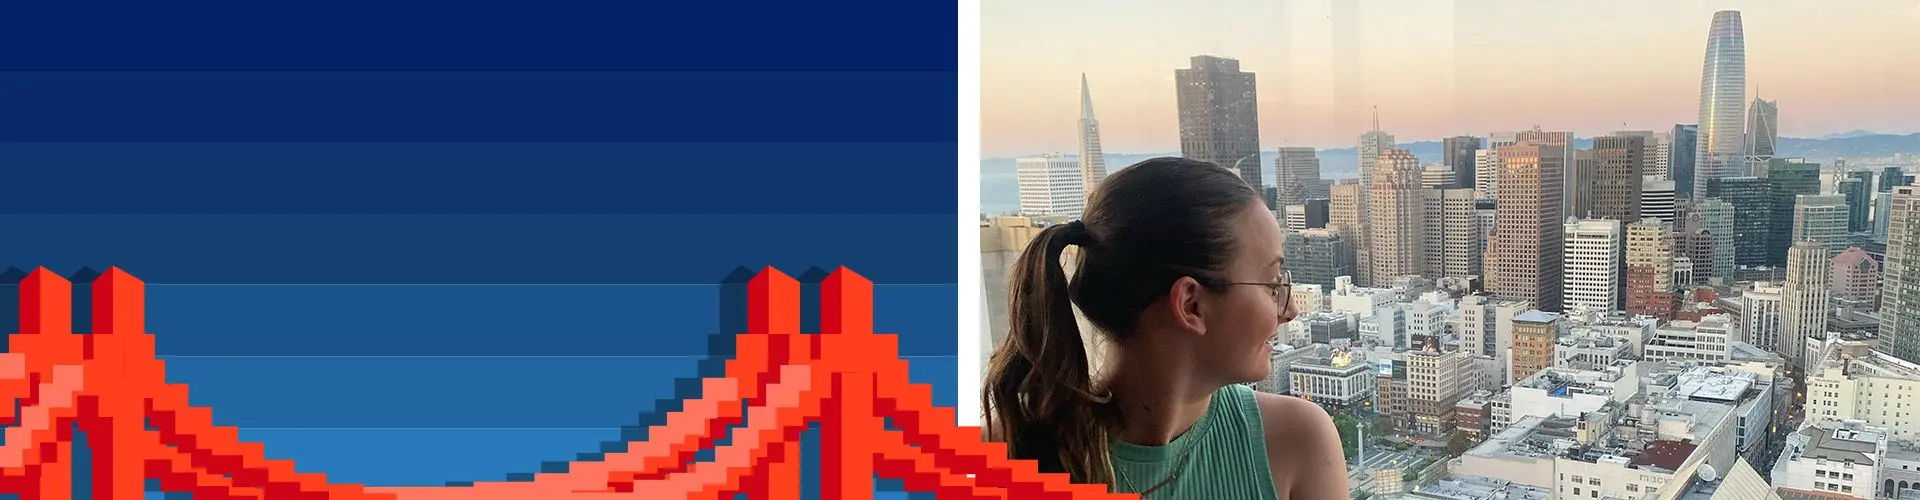 Girl looks out window on San Francisco city on a sunny evening. Other half of image is pixel art illustration of Golden Gate bridge on a blue background.